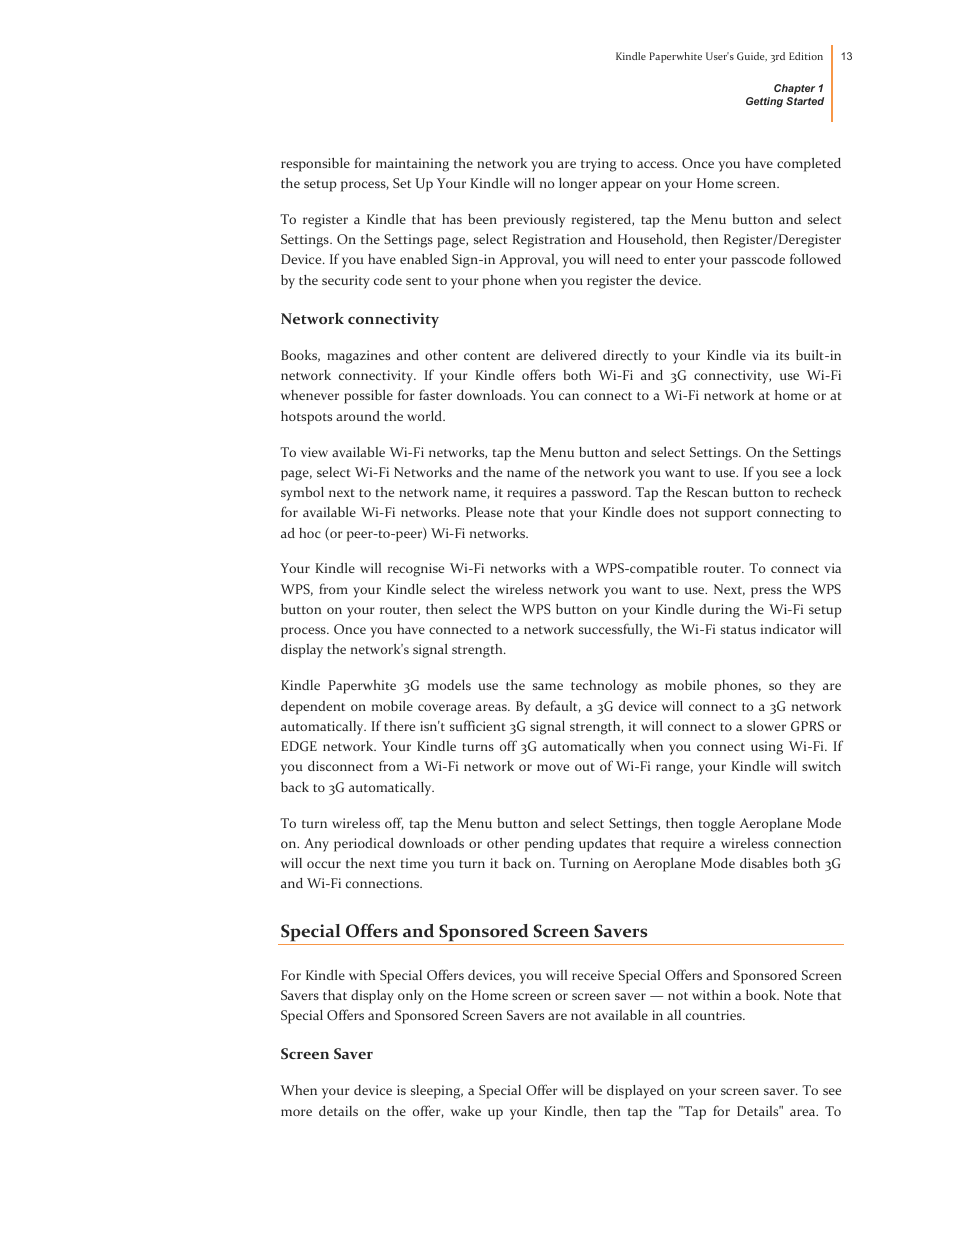 Network connectivity, Special offers and sponsored screen savers, Screen saver | Kindle Paperwhite (2nd Generation) User Manual | Page 13 / 47